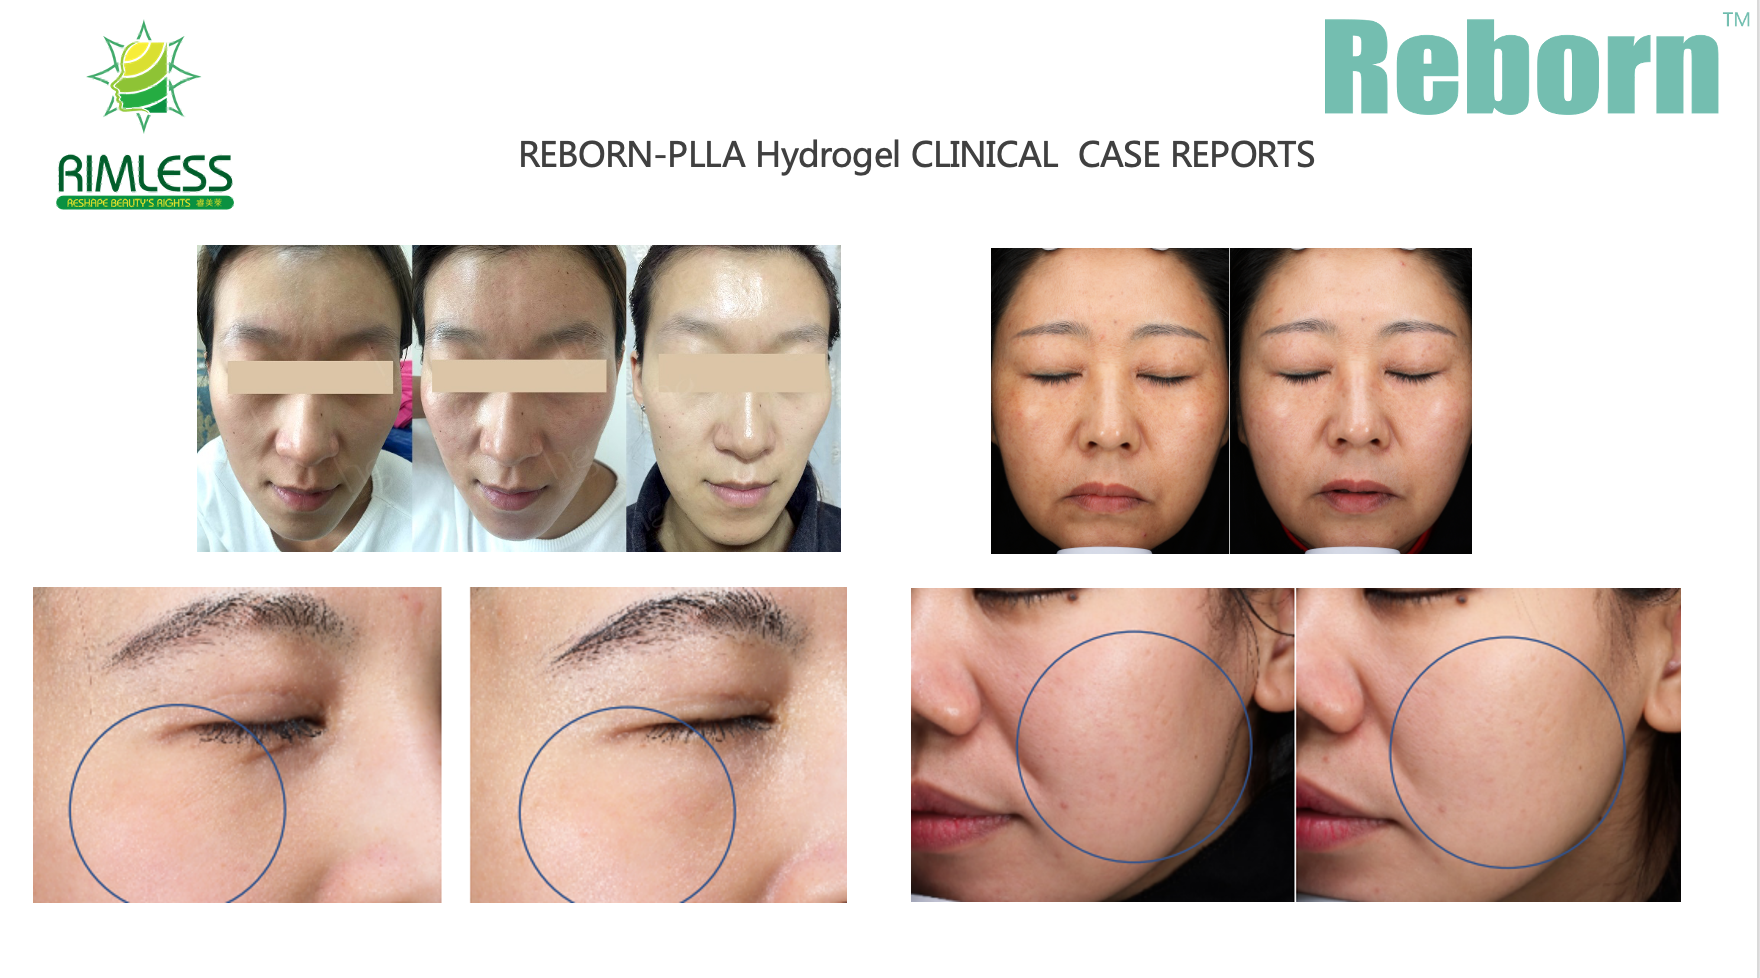 Reborn PLLA Cosmetic Gel For Face - Plumps & Hydrates